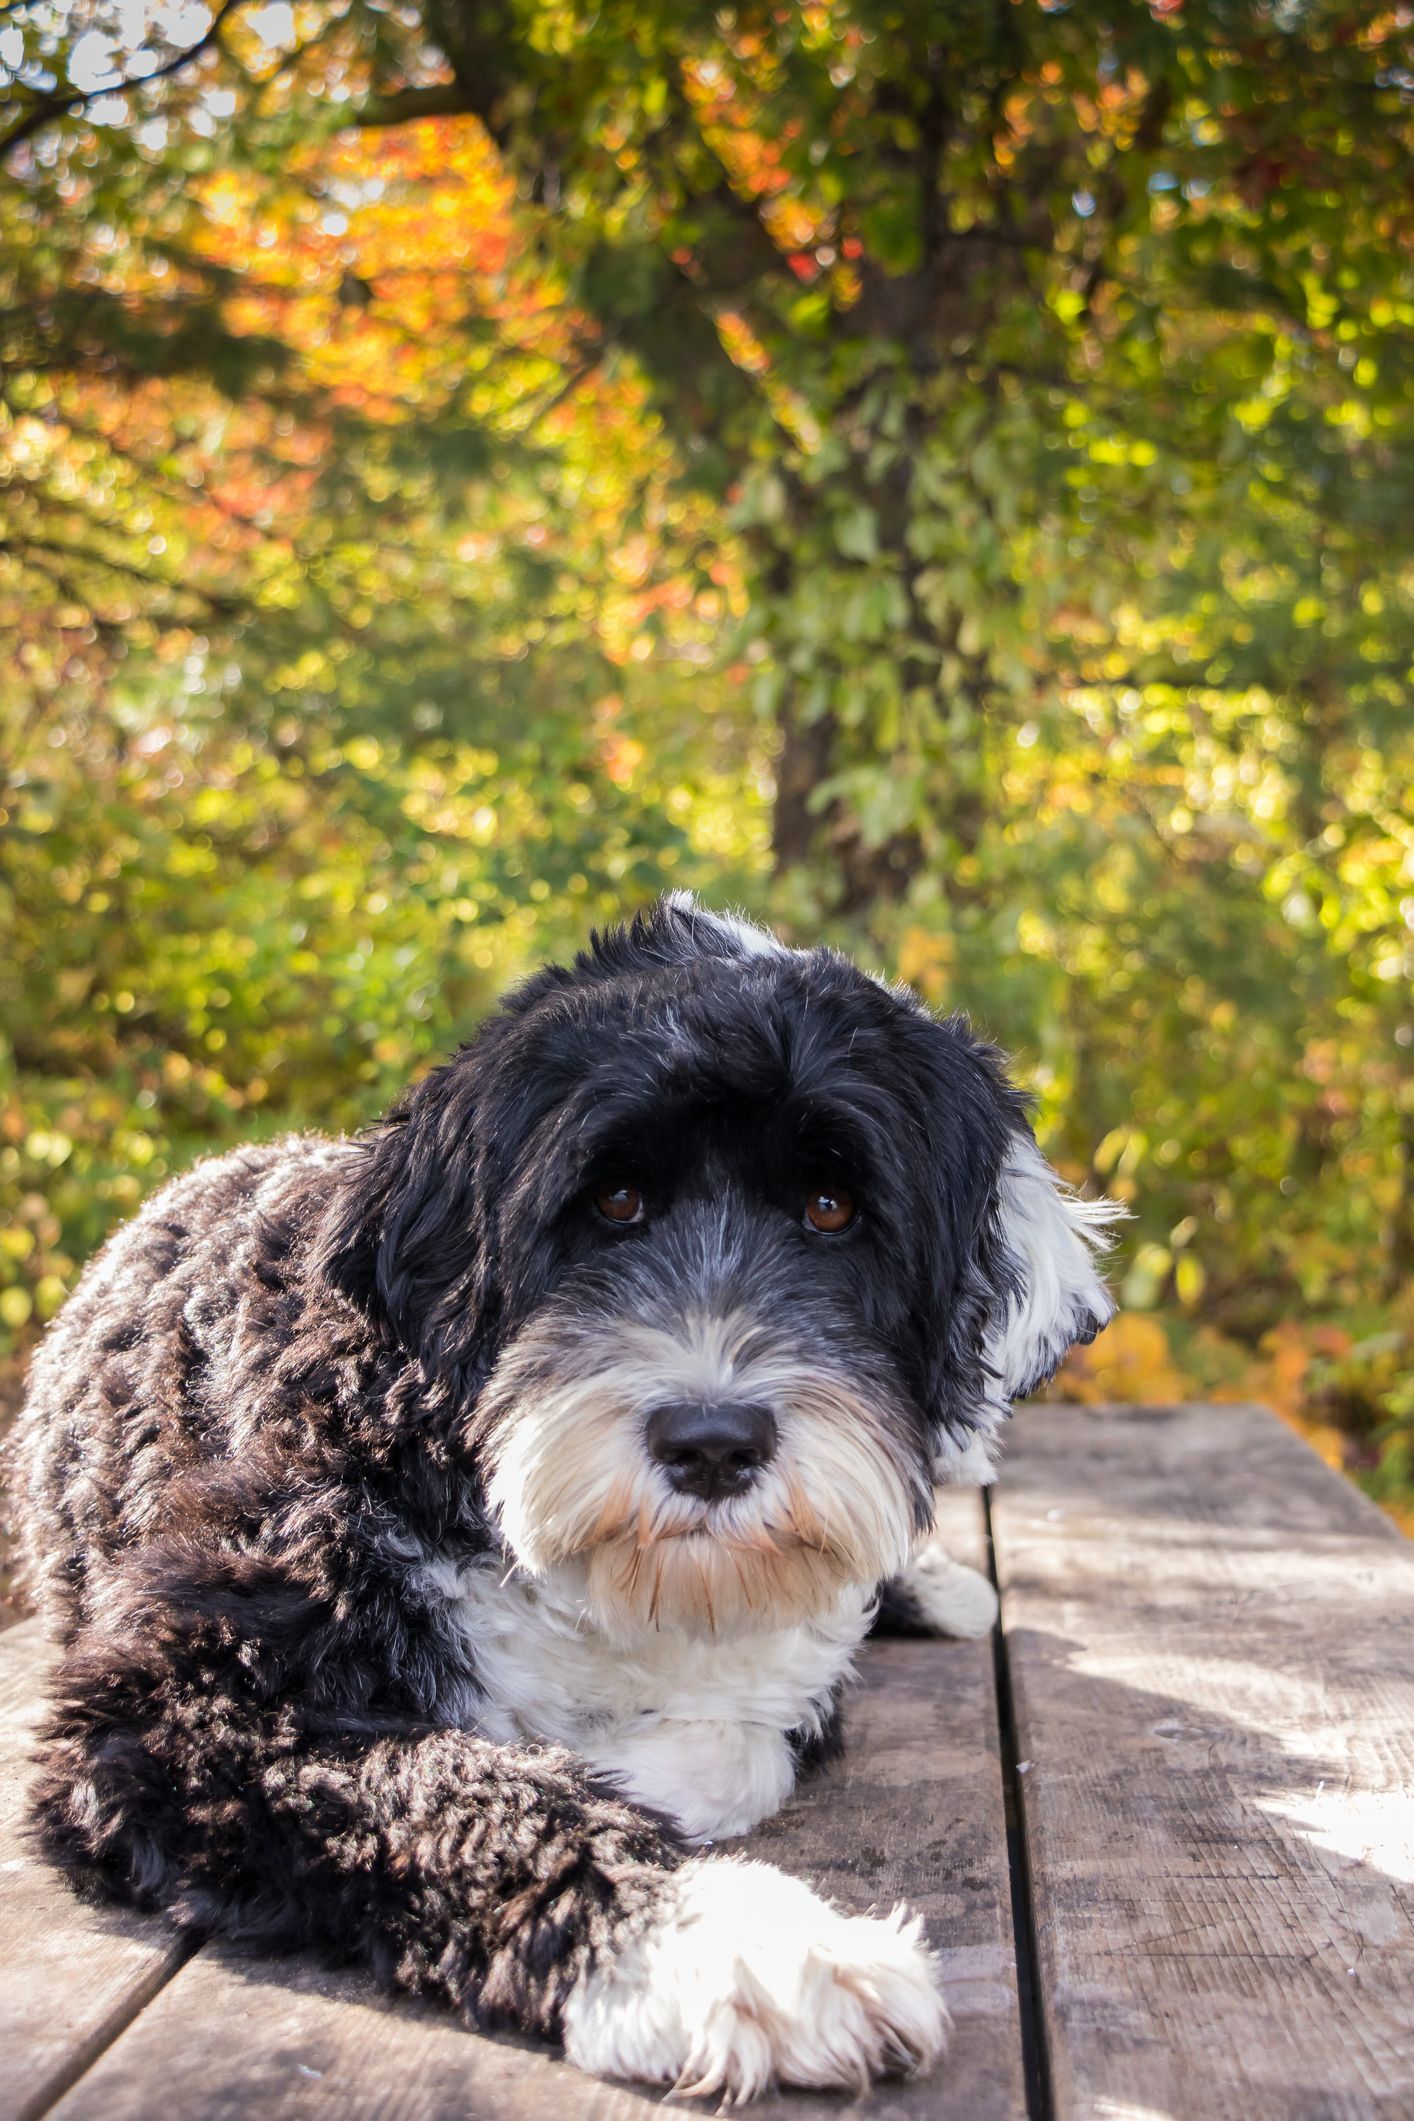 https://hips.hearstapps.com/hmg-prod/images/dog-laying-on-picnic-table-royalty-free-image-1626375919.jpg